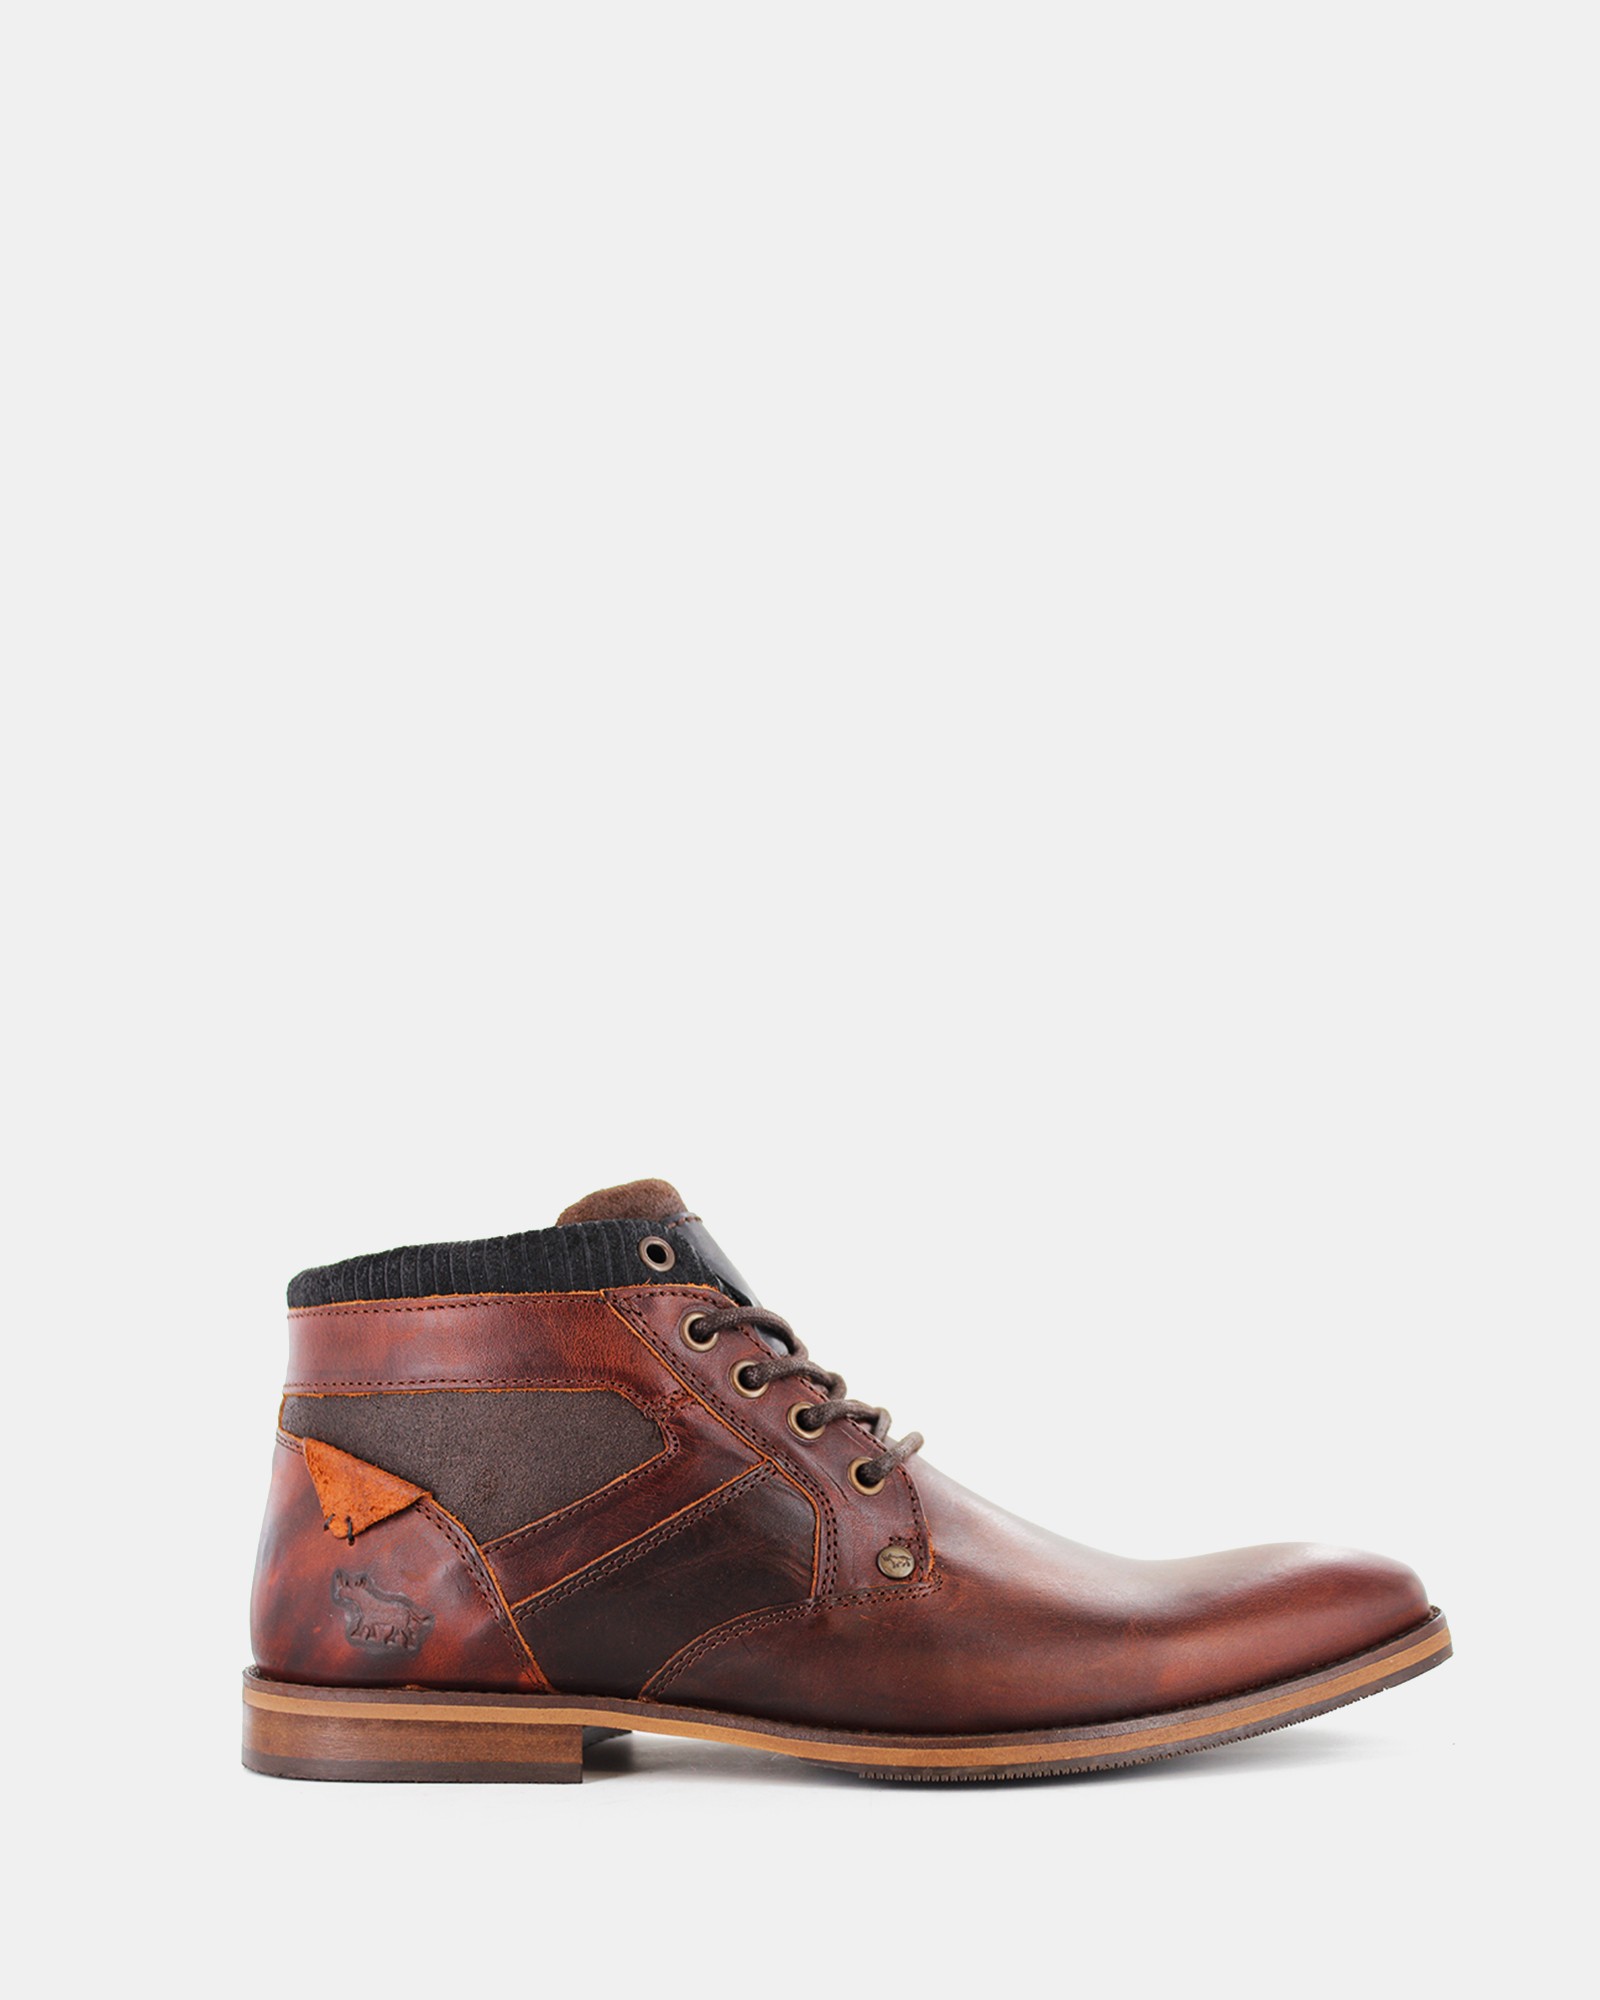 Medford Boots Rust by Wild Rhino | ShoeSales